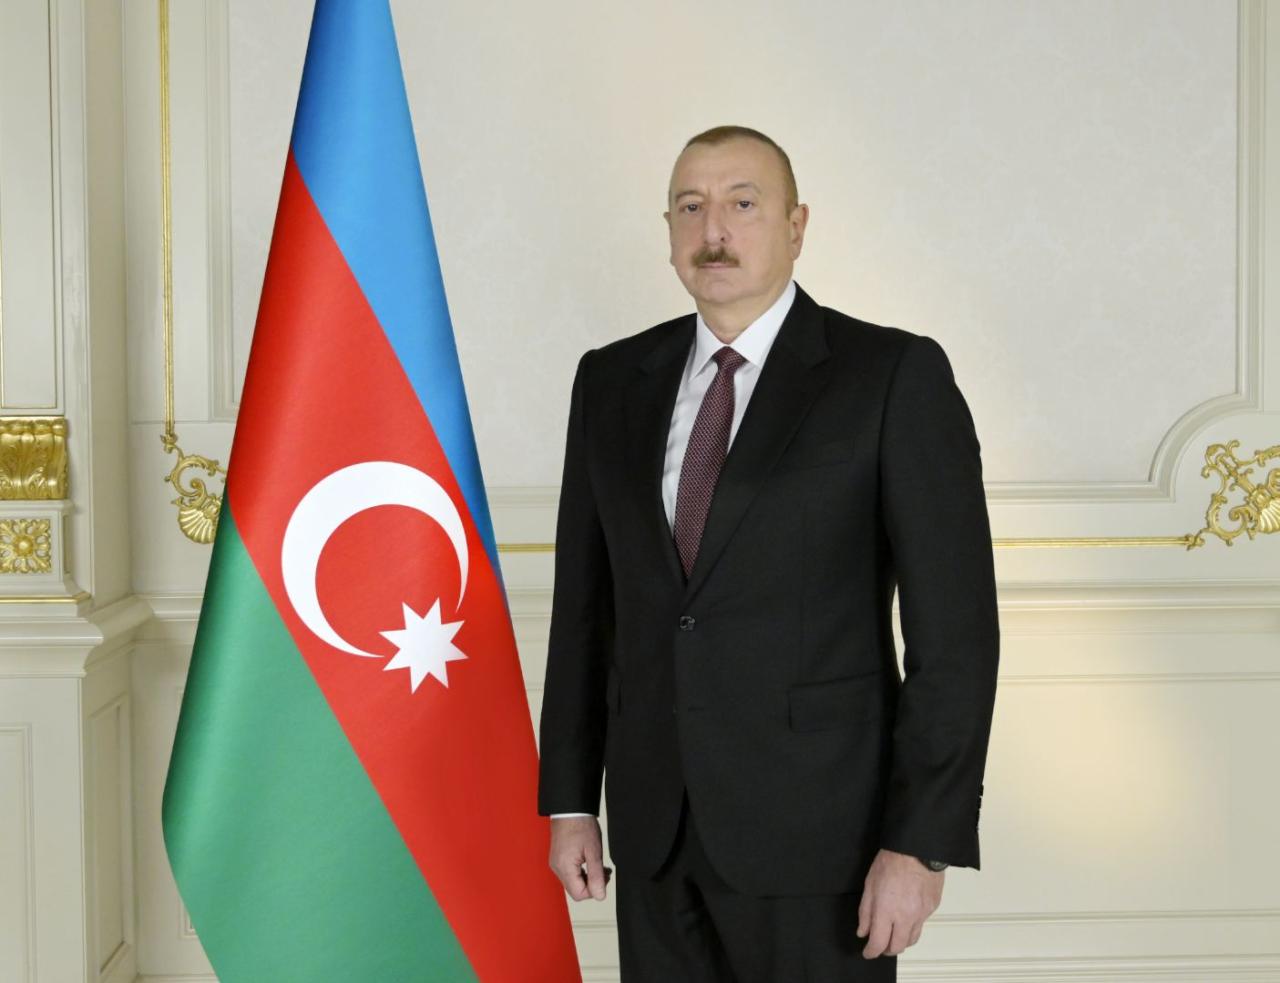 President Ilham Aliyev shares post on occasion of Remembrance Day [PHOTO]